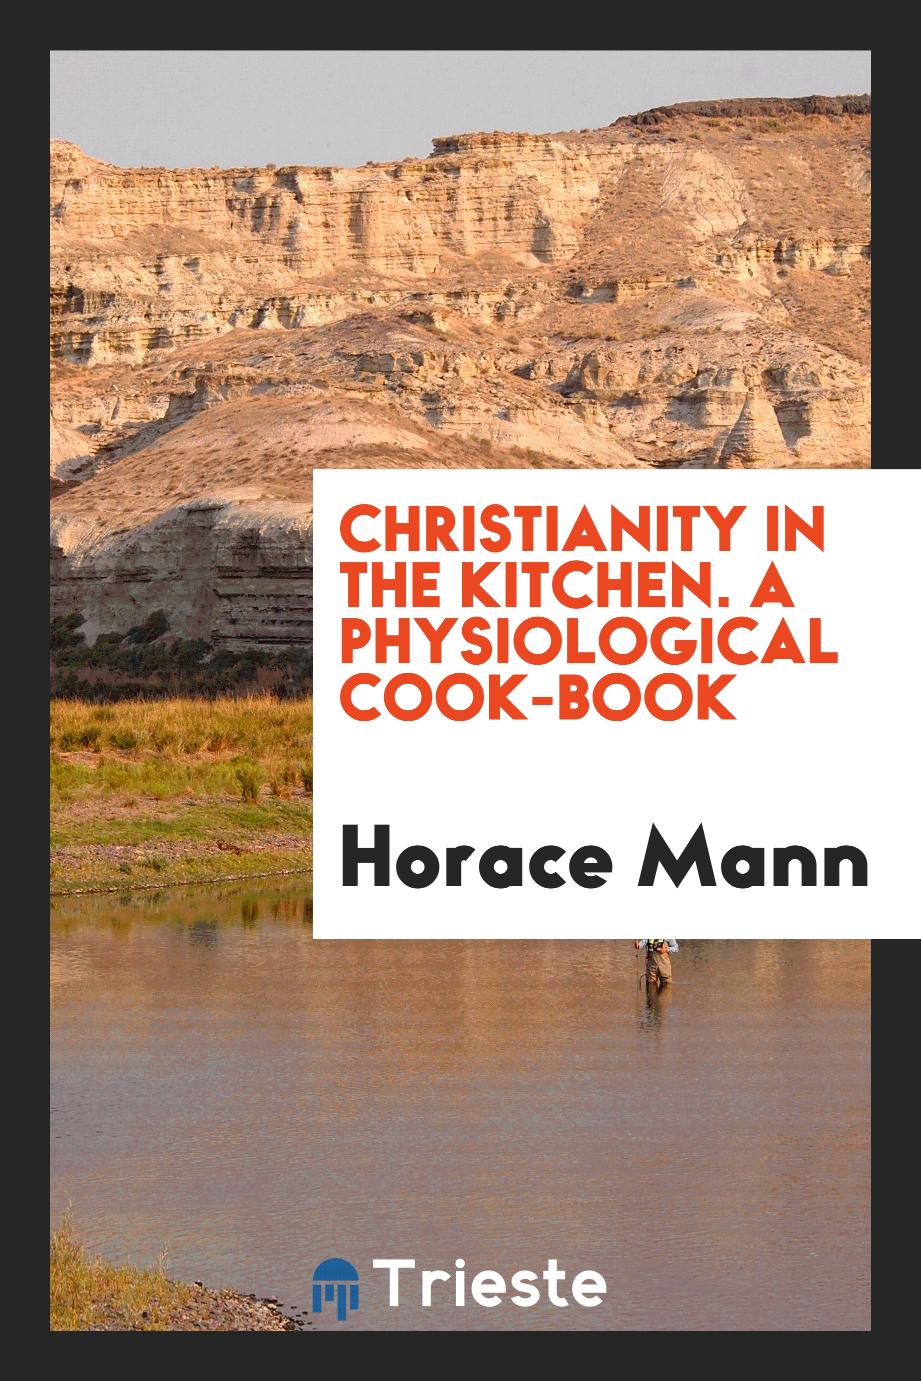 Christianity in the kitchen. A physiological cook-book